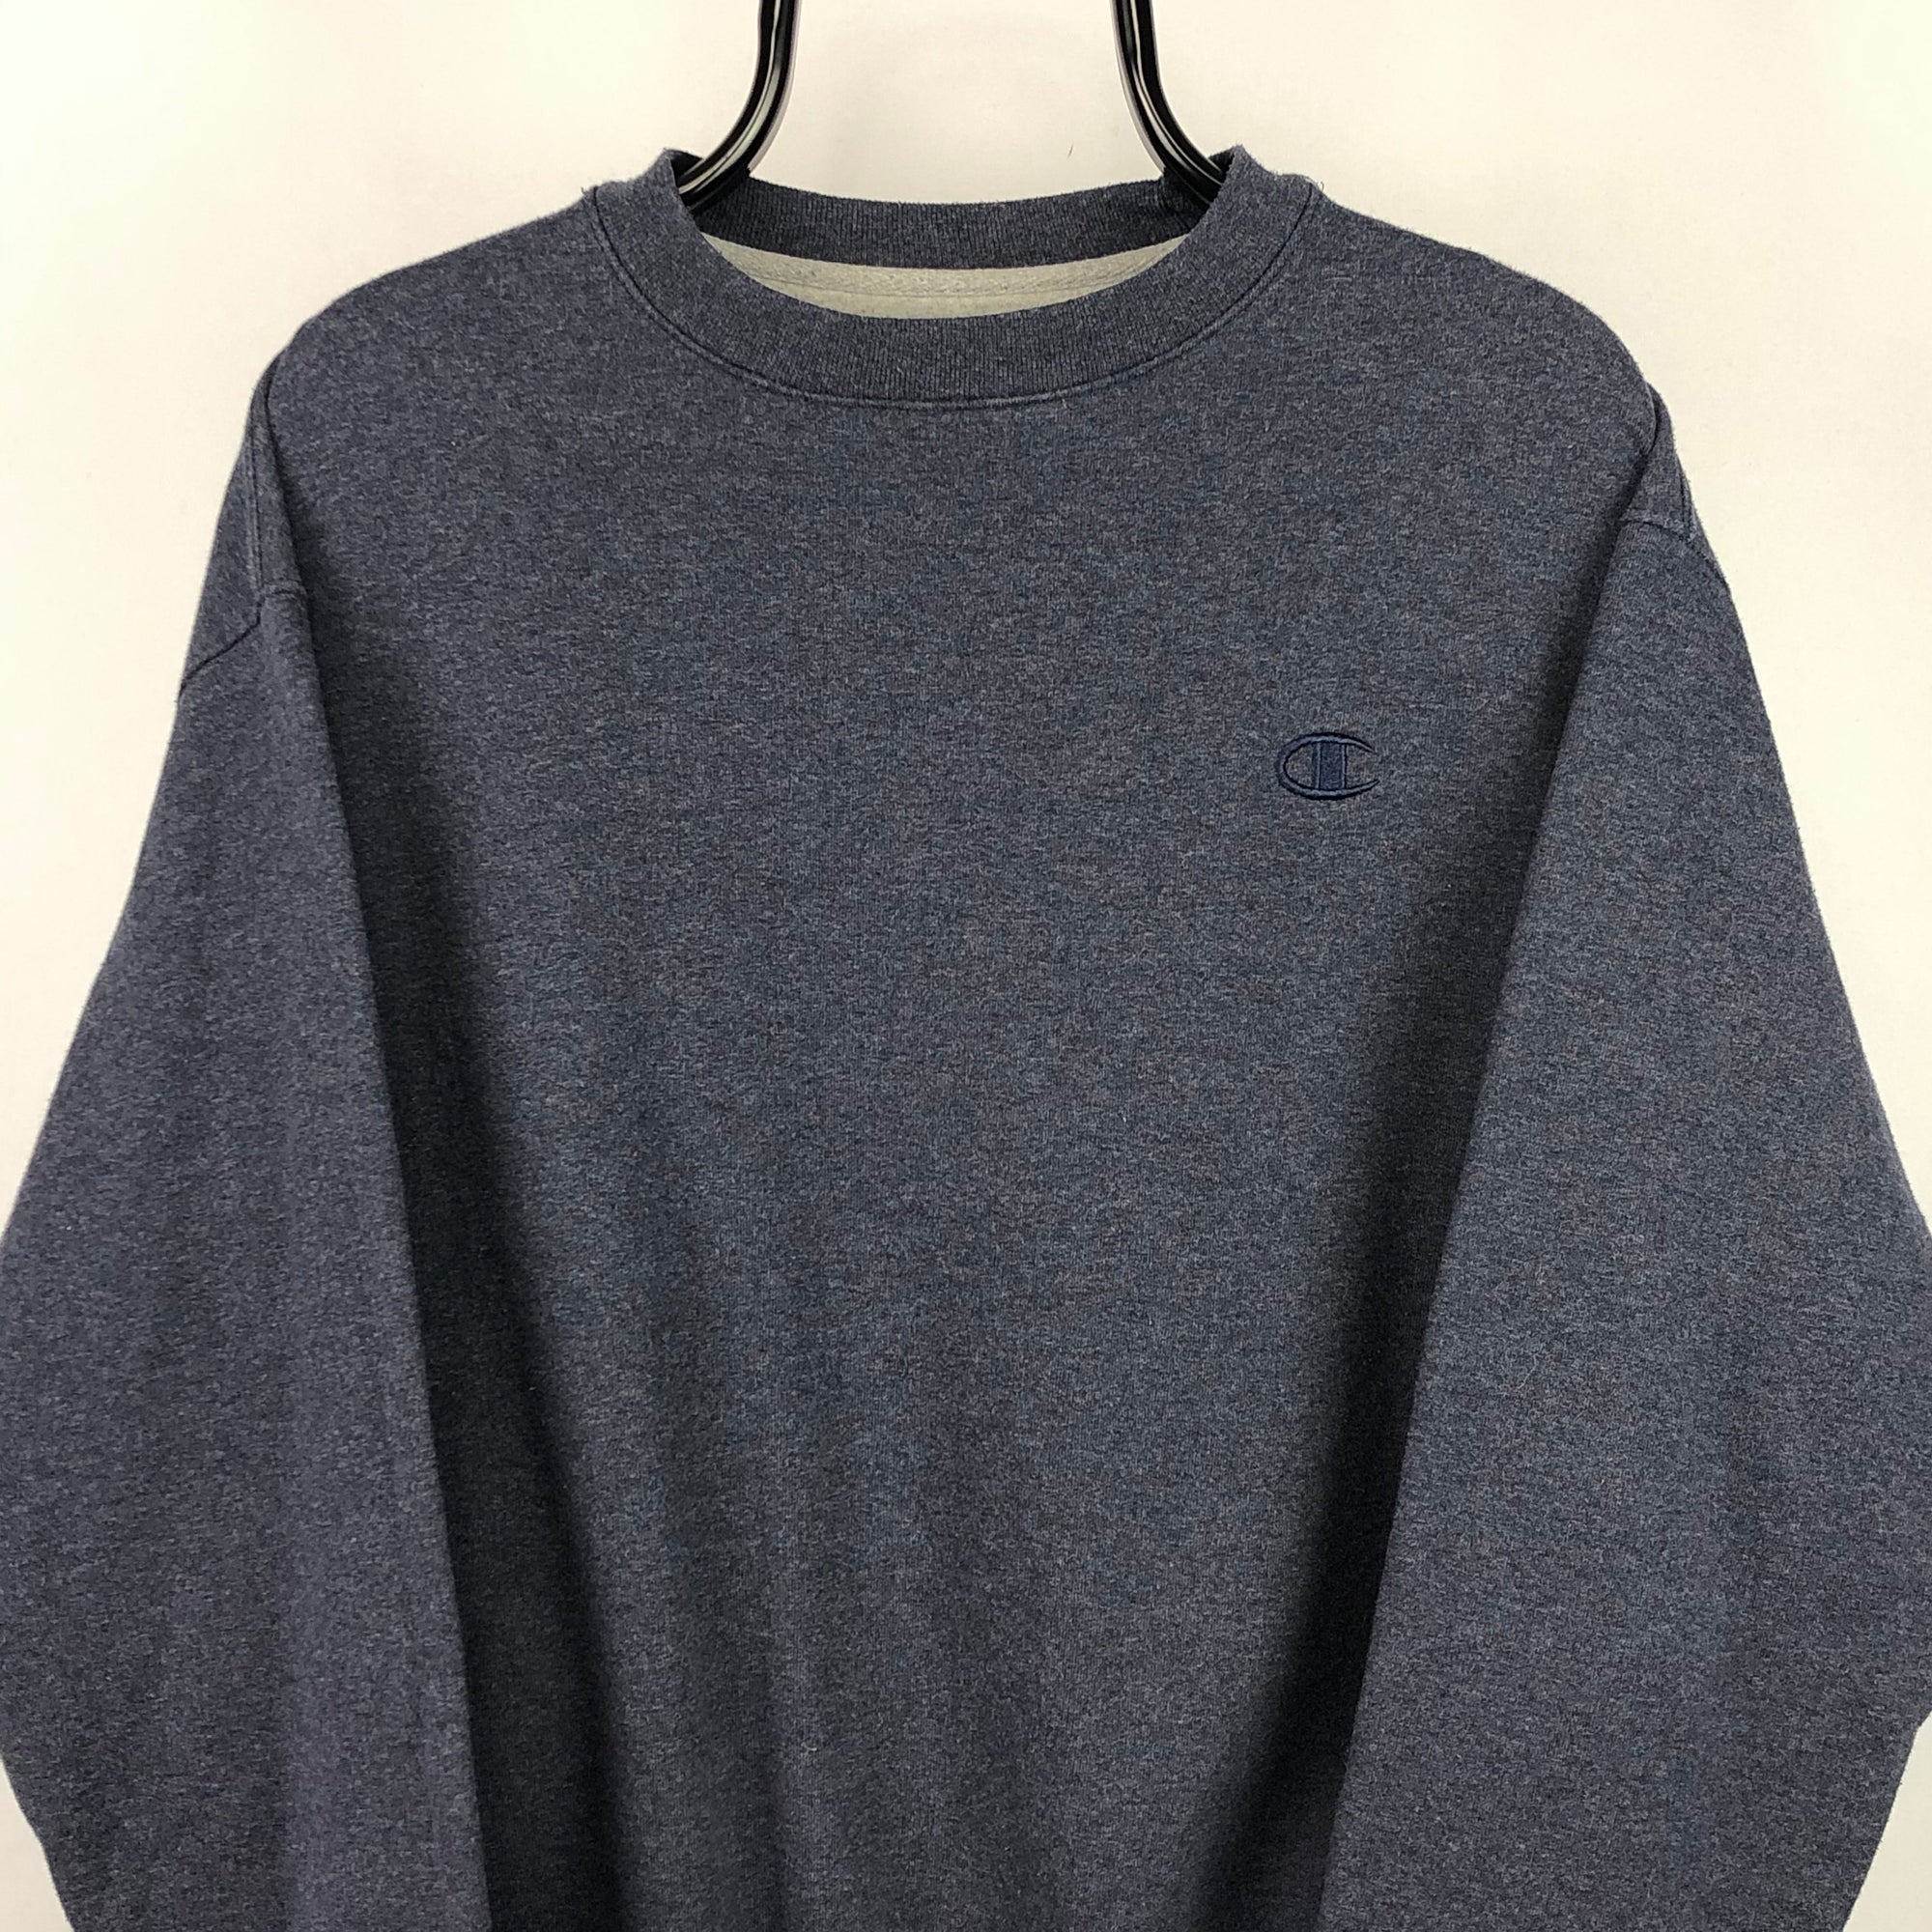 Vintage Champion Embroidered Small Logo Sweatshirt in Navy - Men's Large/Women's XL